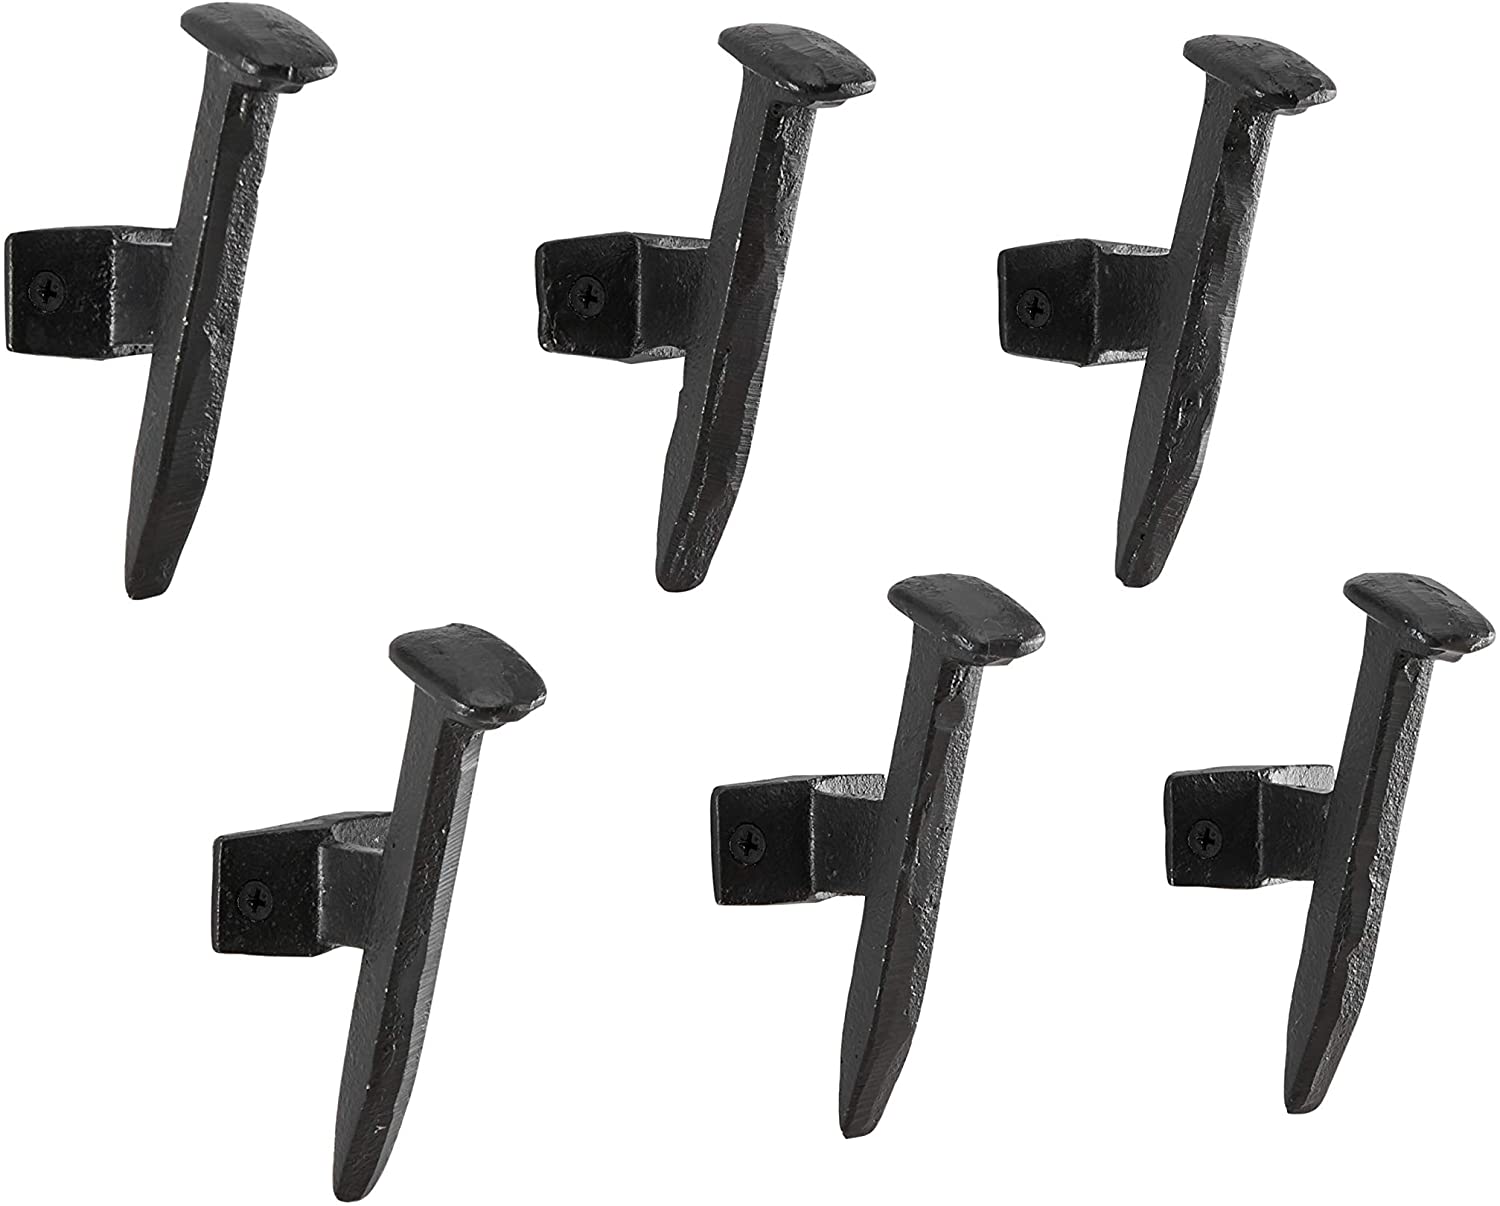 Unknown1 Cast Iron Industrial Railway Nail Decorative Wall Hooks Set 6 Black Modern Contemporary Matte Includes Hardware